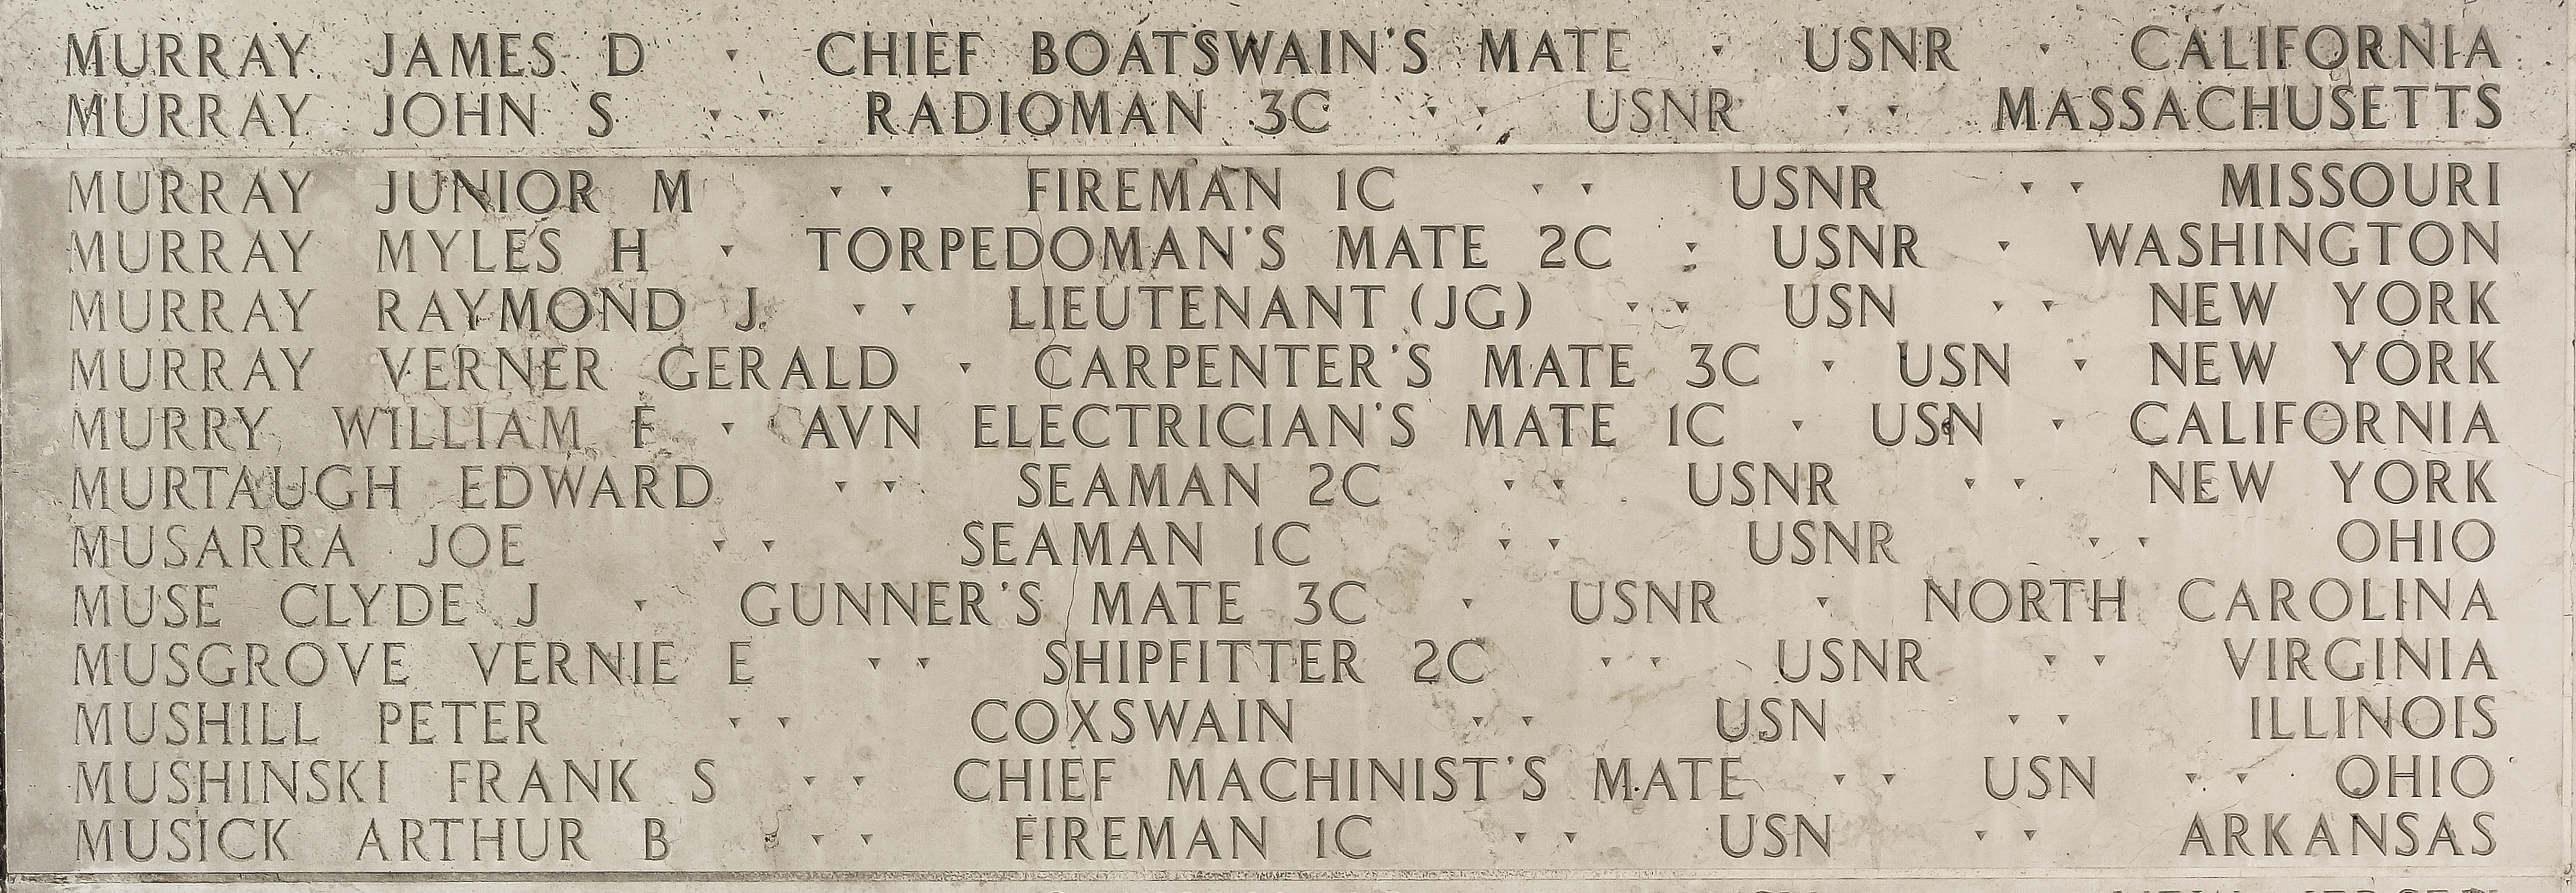 William F. Murry, Aviation Electrician's Mate First Class